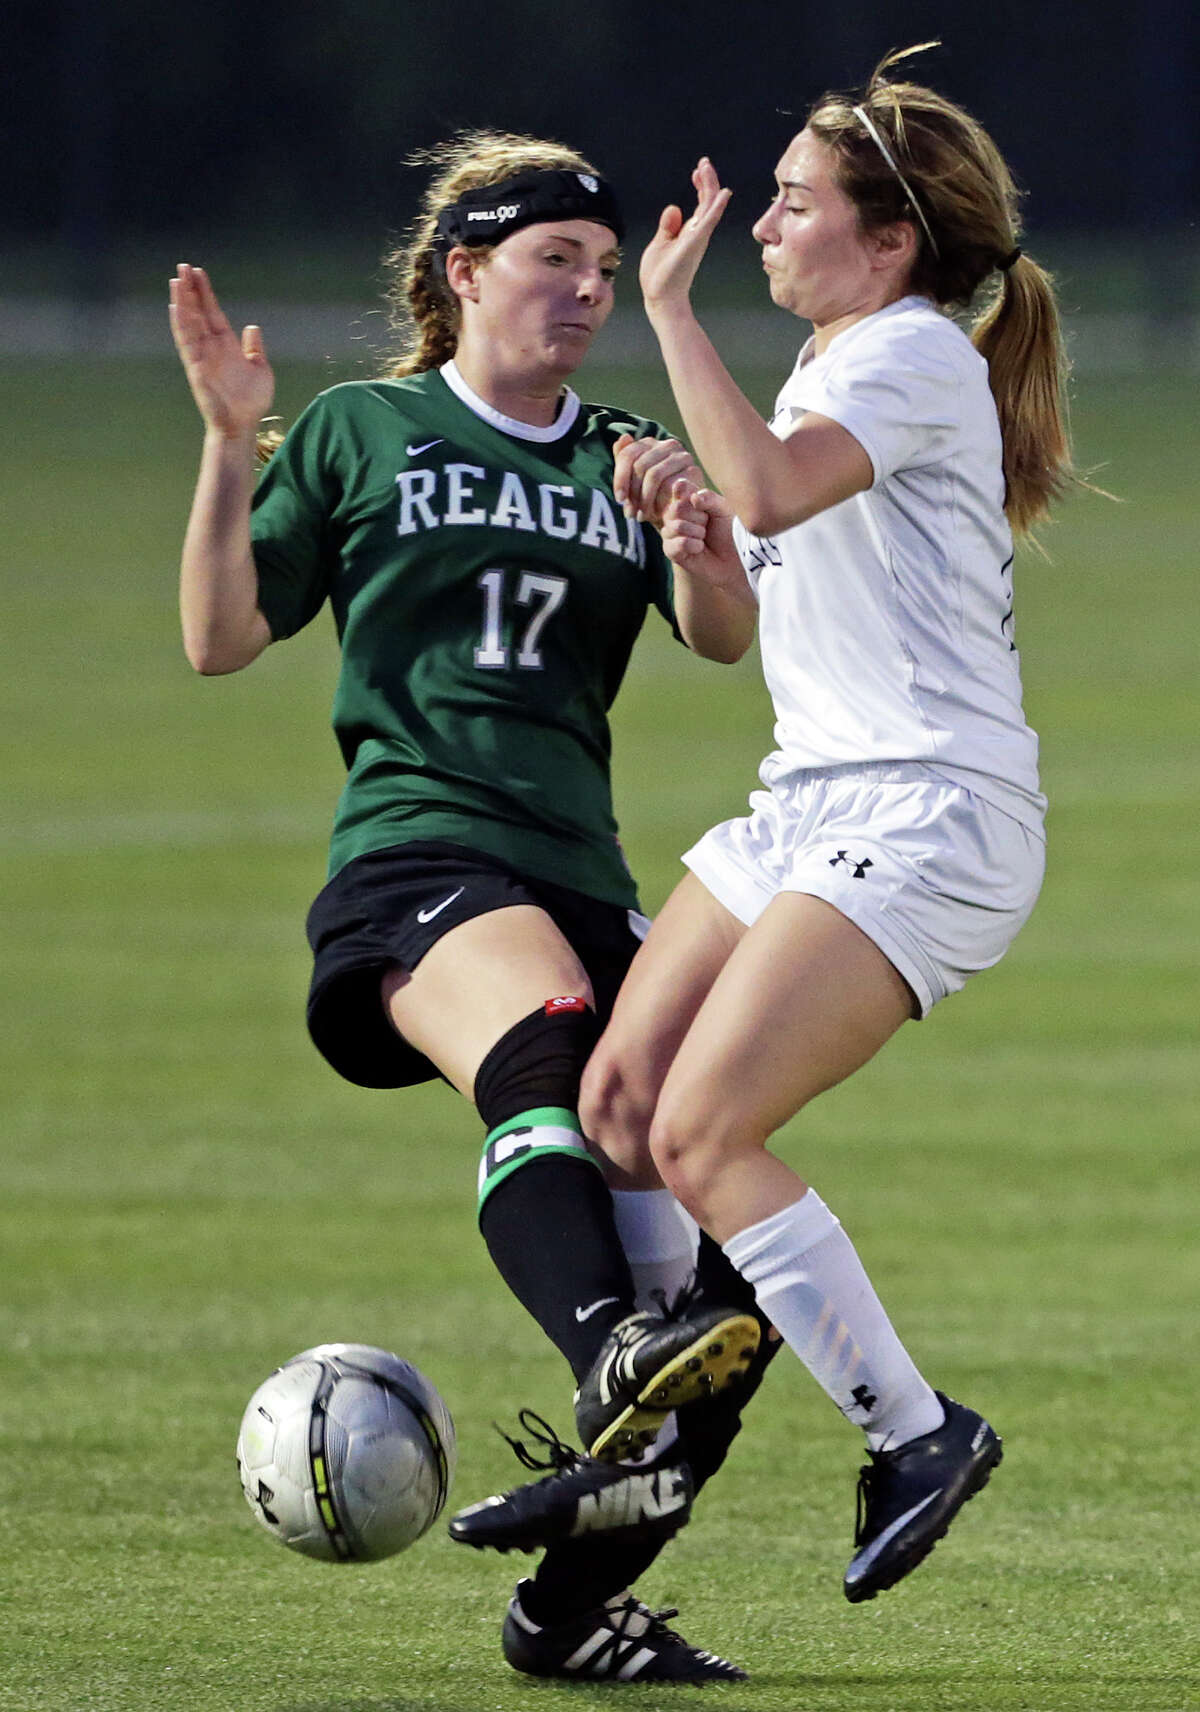 Sarah Grace Freeman collides with the Rangers' Gabby Rodriguez (right) as the Reagan girls beat Smithson Valley 1-0 in third round 6A soccer playoffs at the UTSA Park West Complex on April 7, 2015.